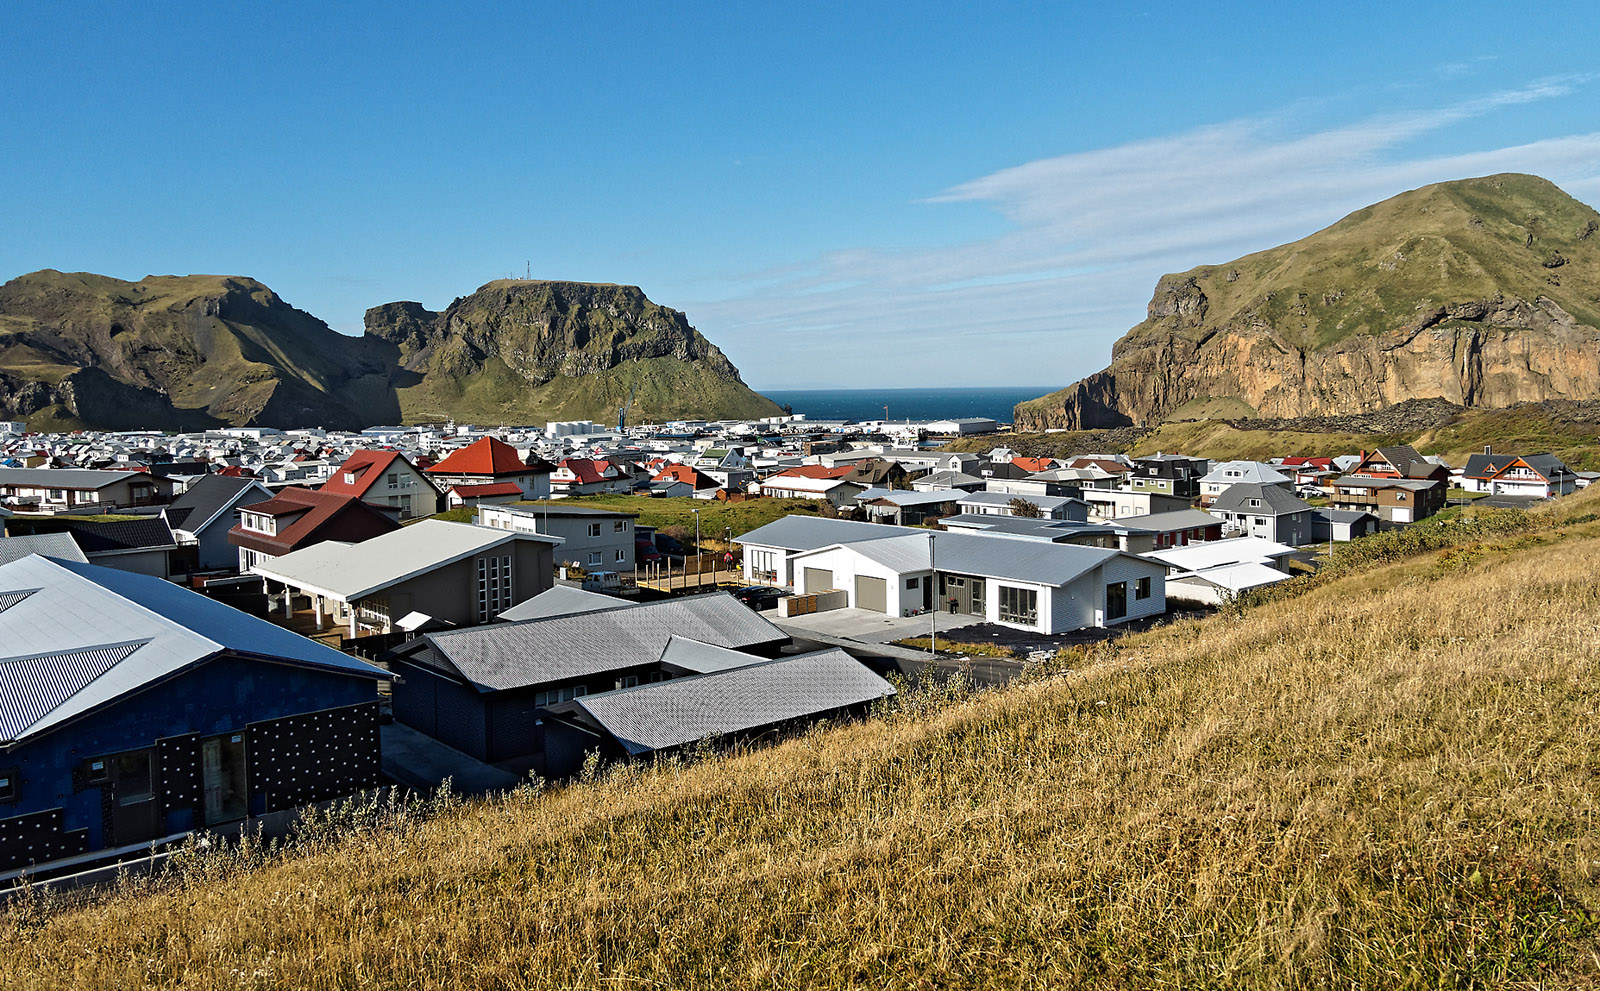 Newly constructed and rebuilt houses at the foot of Eldfell on Heimaey. On the far right of the field is Heimaklettur, the largest mountain on the island that has steep cliffs to the ocean.